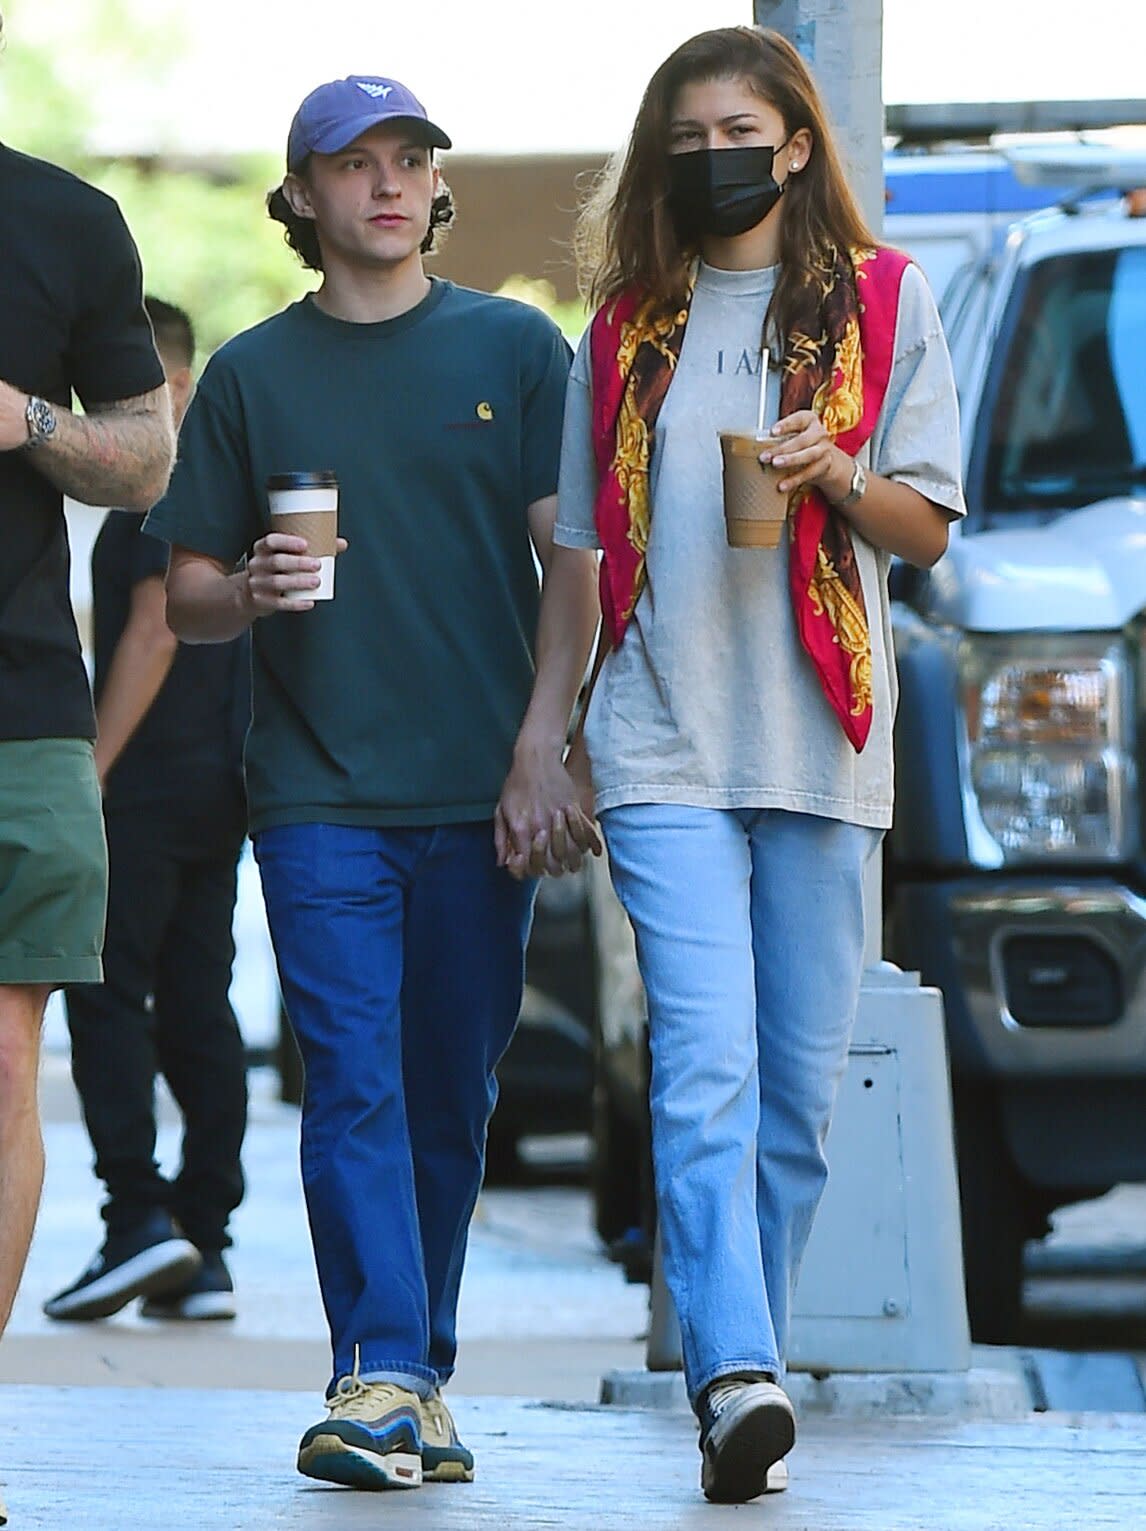 09/02/2022 EXCLUSIVE: Zendaya and Tom Holland step out holding hands in New York City. The rare spotting comes a day after the American actress celebrated her 26th birthday. The couple strolled the streets of Lower Manhattan while keeping close. Also spotted along for the stroll was Zendaya's mom. sales@theimagedirect.com Please byline:TheImageDirect.com *EXCLUSIVE PLEASE EMAIL sales@theimagedirect.com FOR FEES BEFORE USE